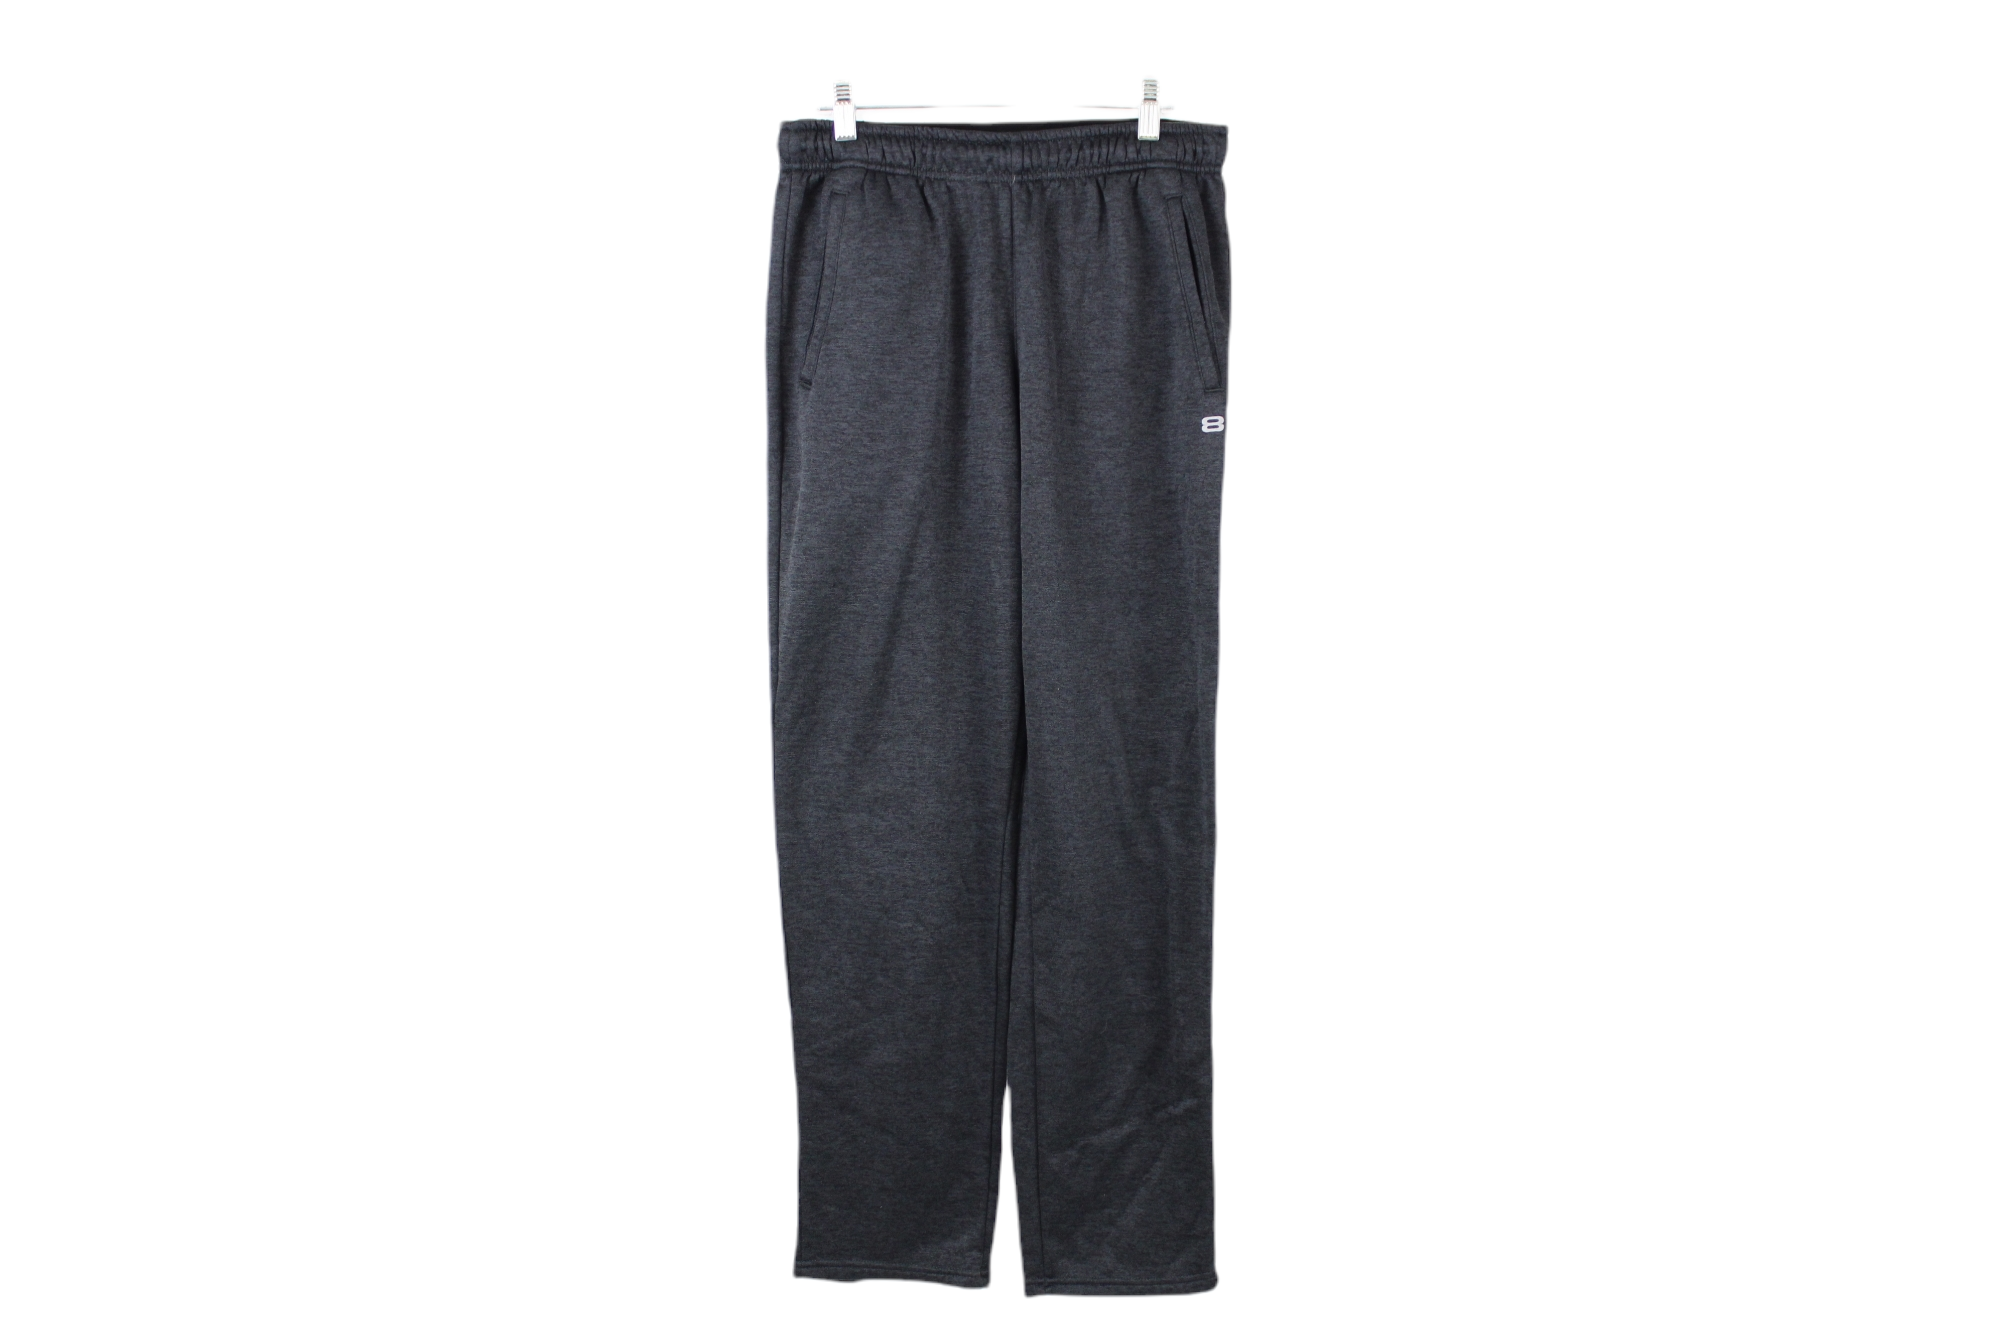 Layer8 Gray Fleece Lined Athletic Pants | M